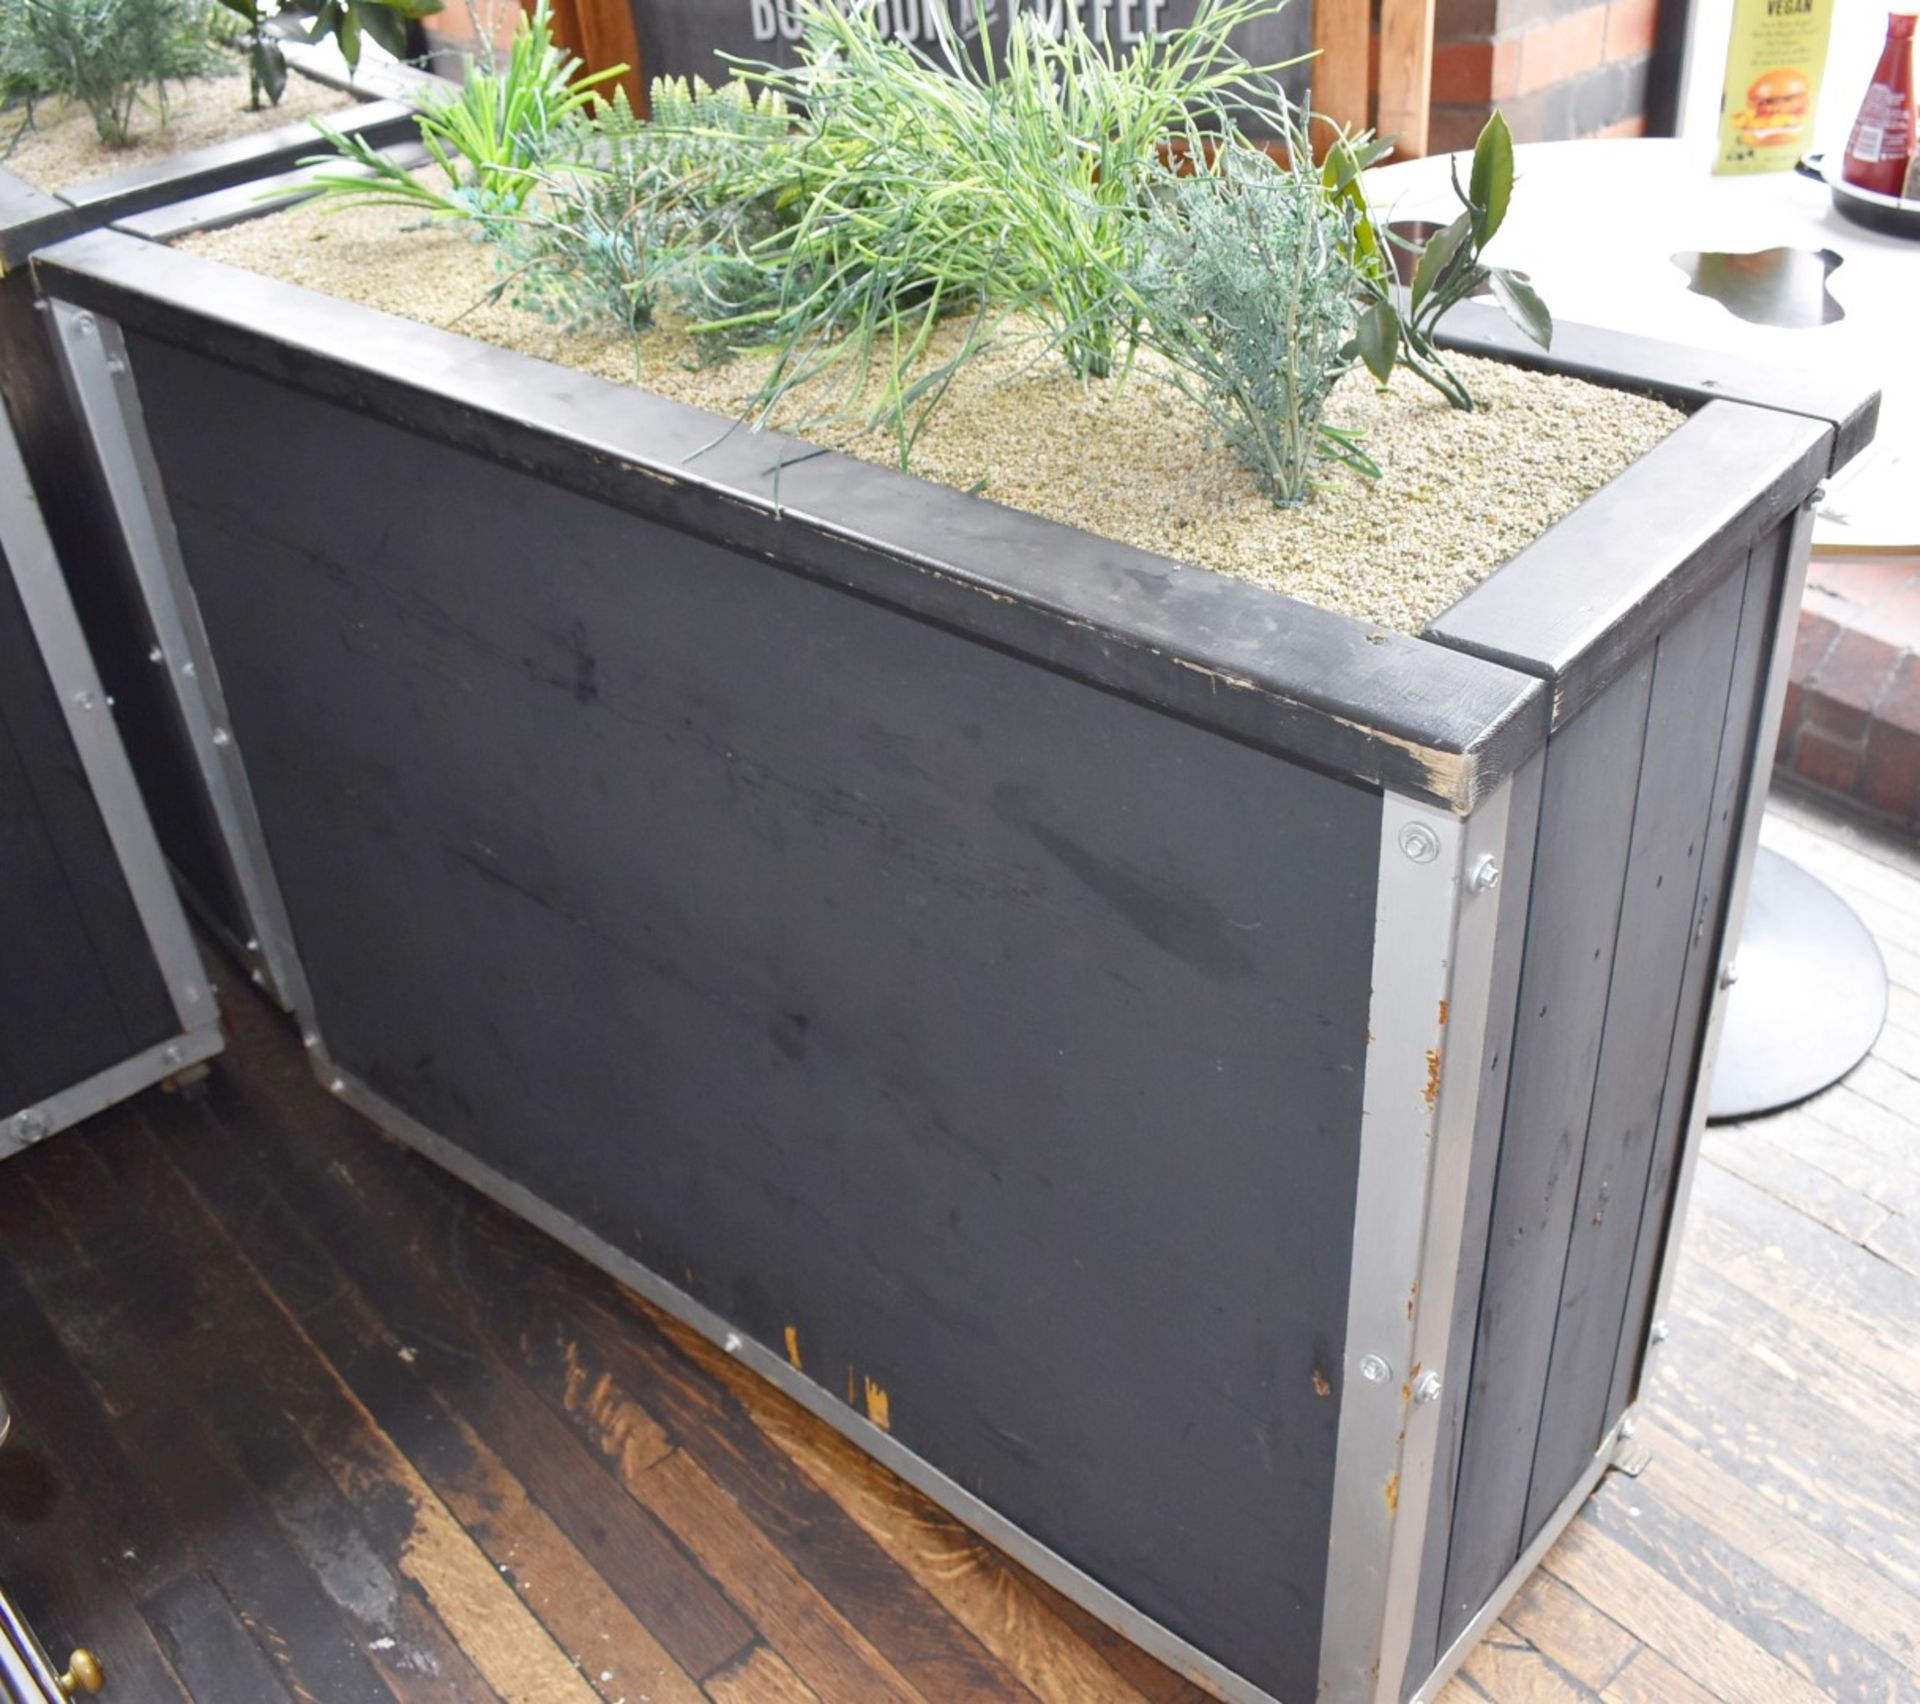 4 x Garden Planters on Wheels With Artificial Plants - Slatted Wooden Design in Grey - Image 6 of 8